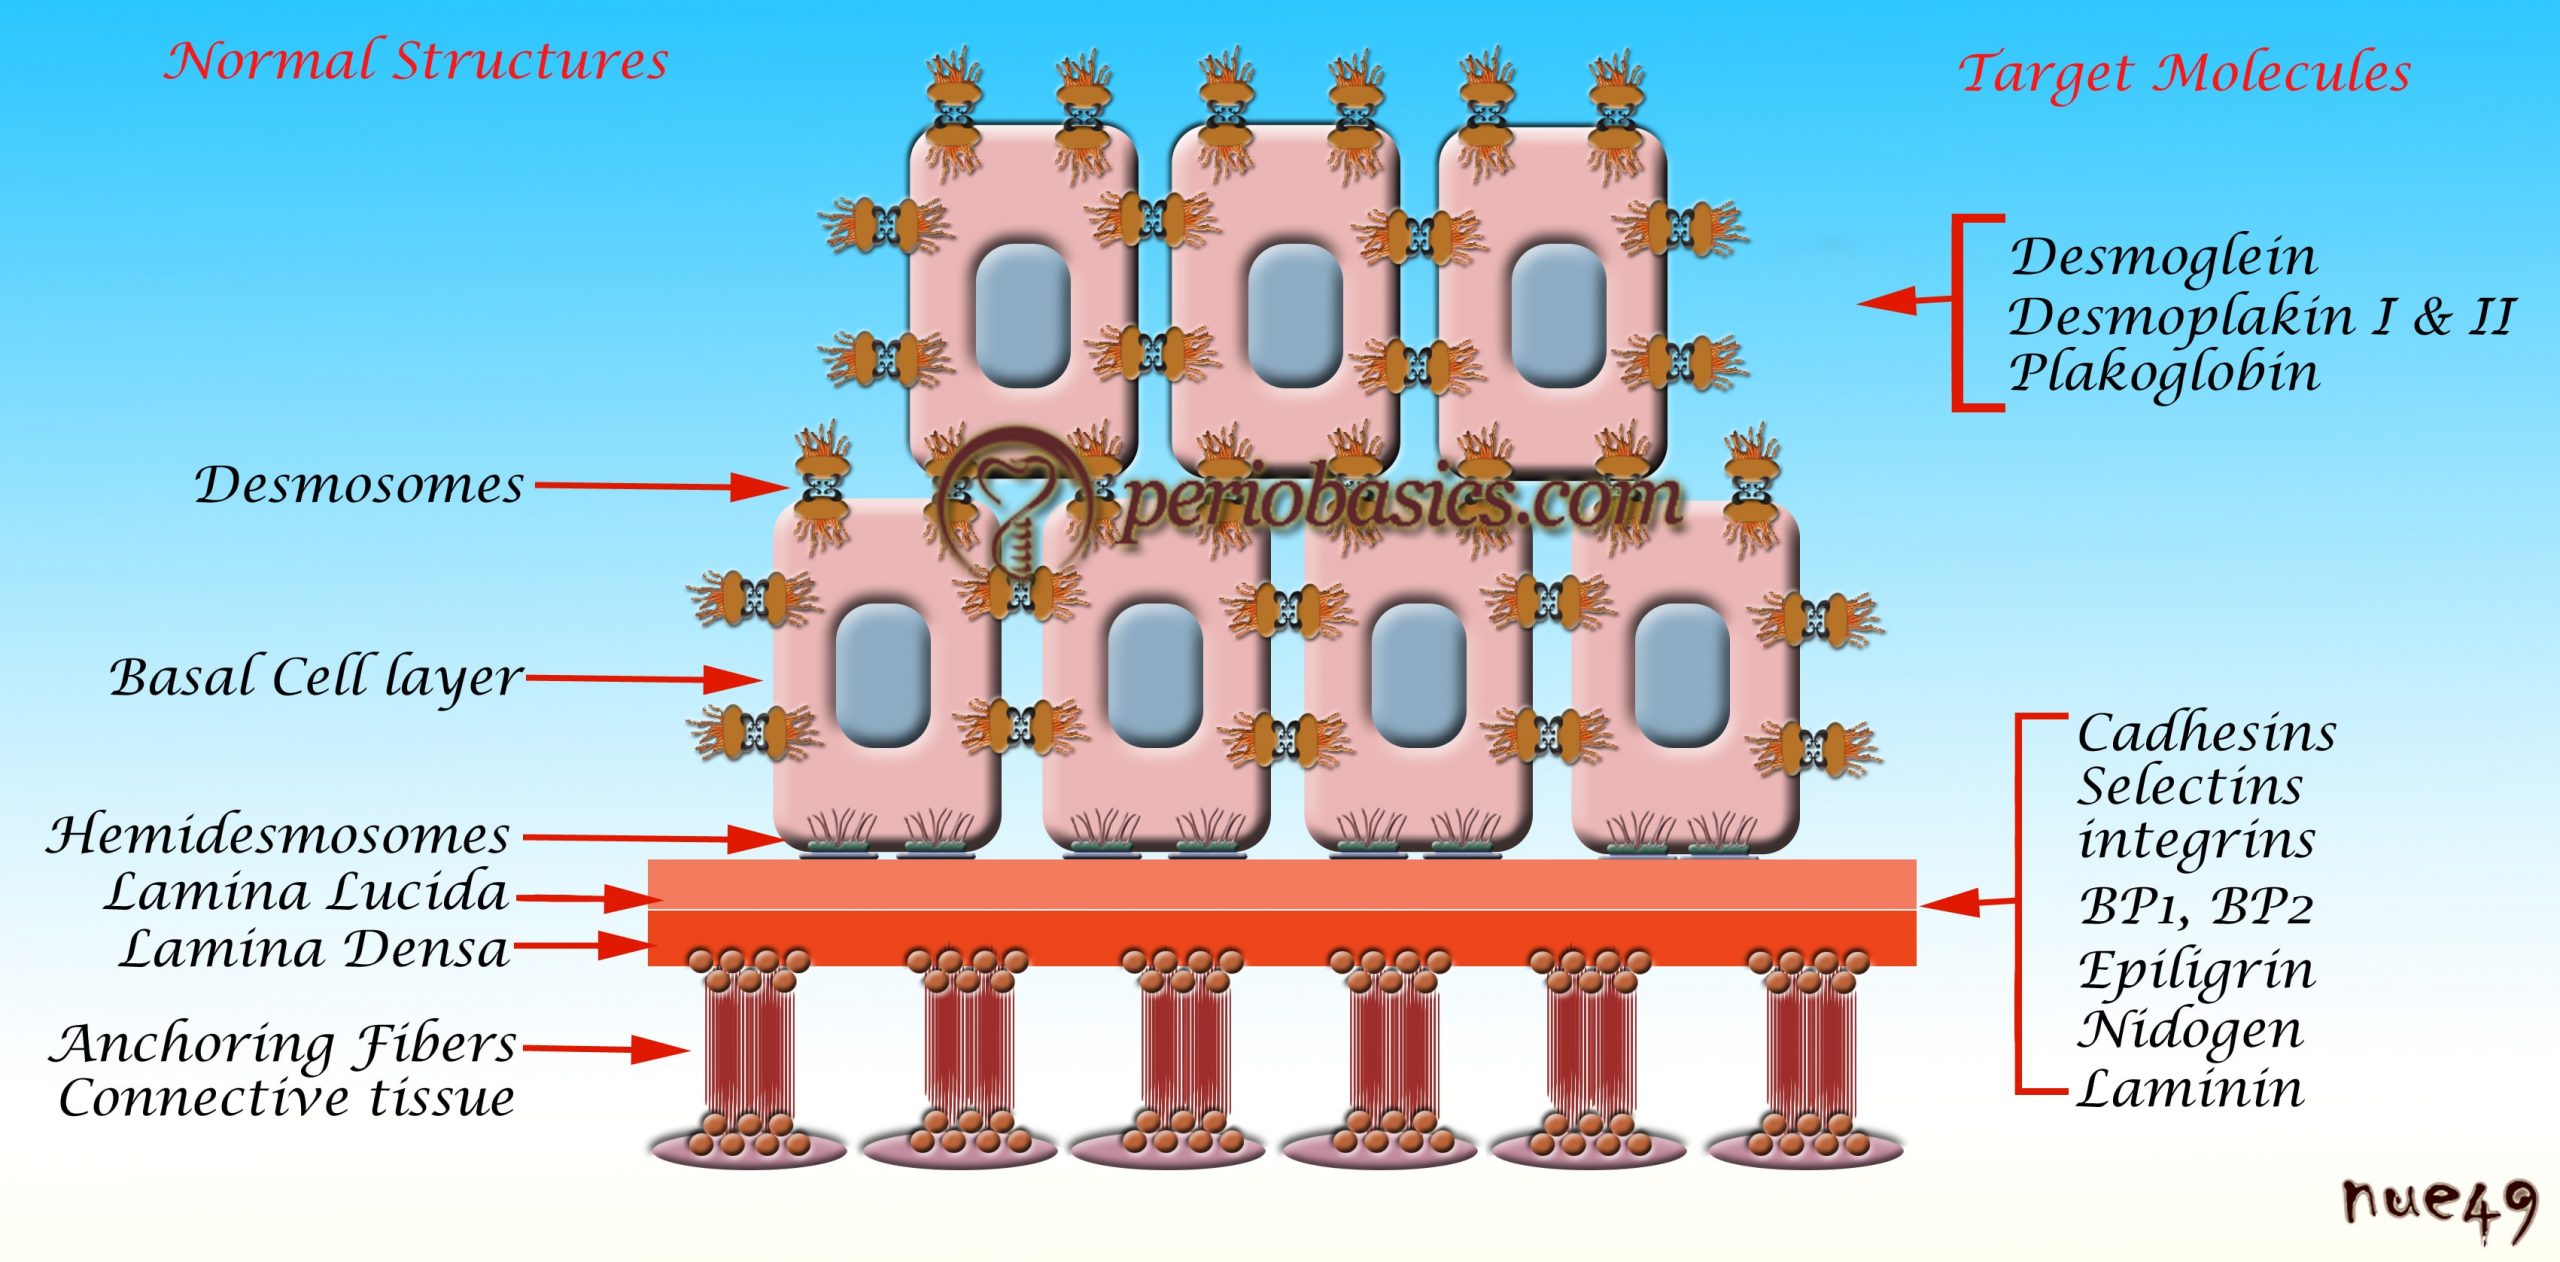 Normal arrangement of basal and supra basal layers on basement membrane and the target molecules